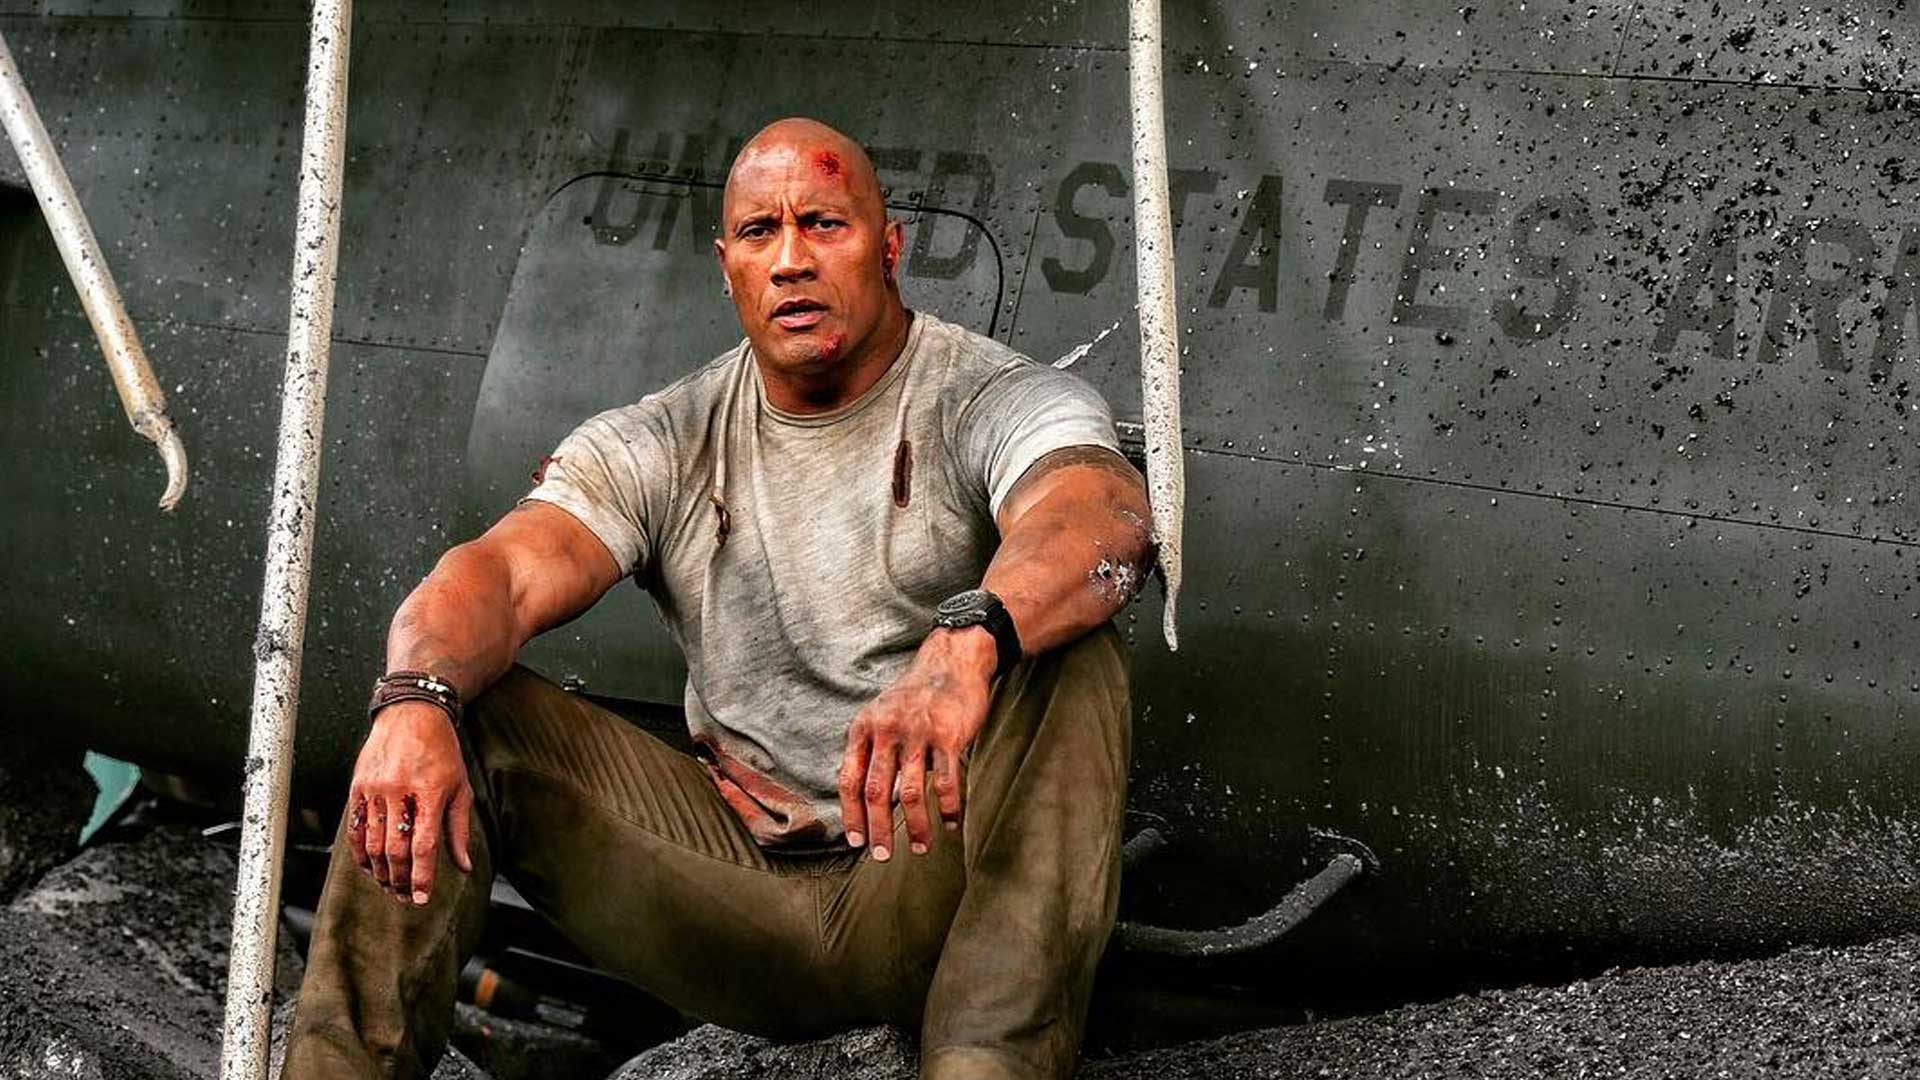 The Rock is disappointed in you